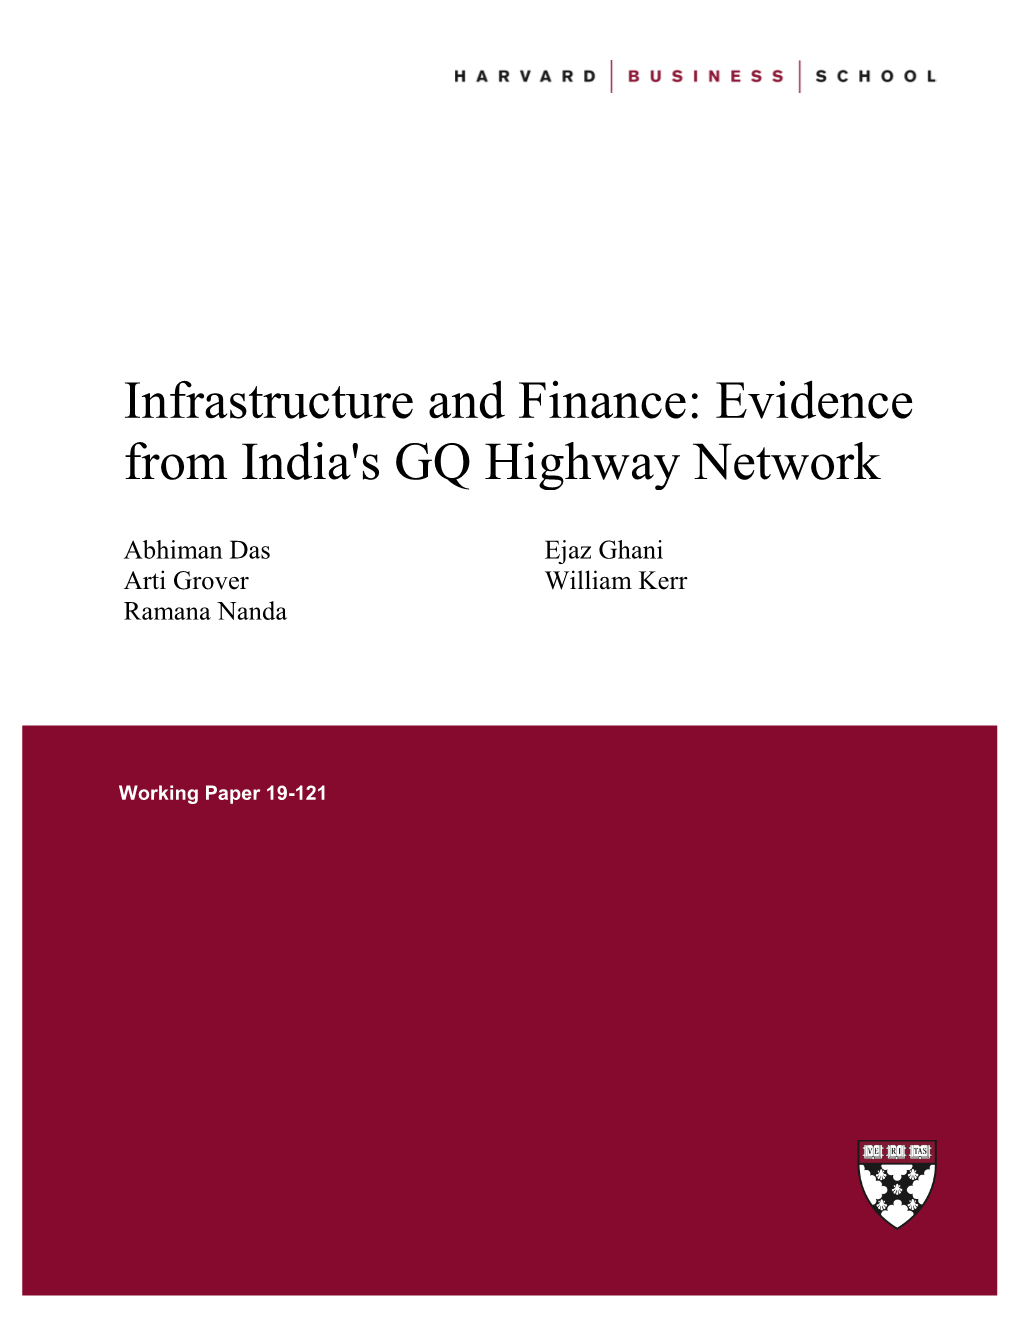 Infrastructure and Finance: Evidence from India's GQ Highway Network